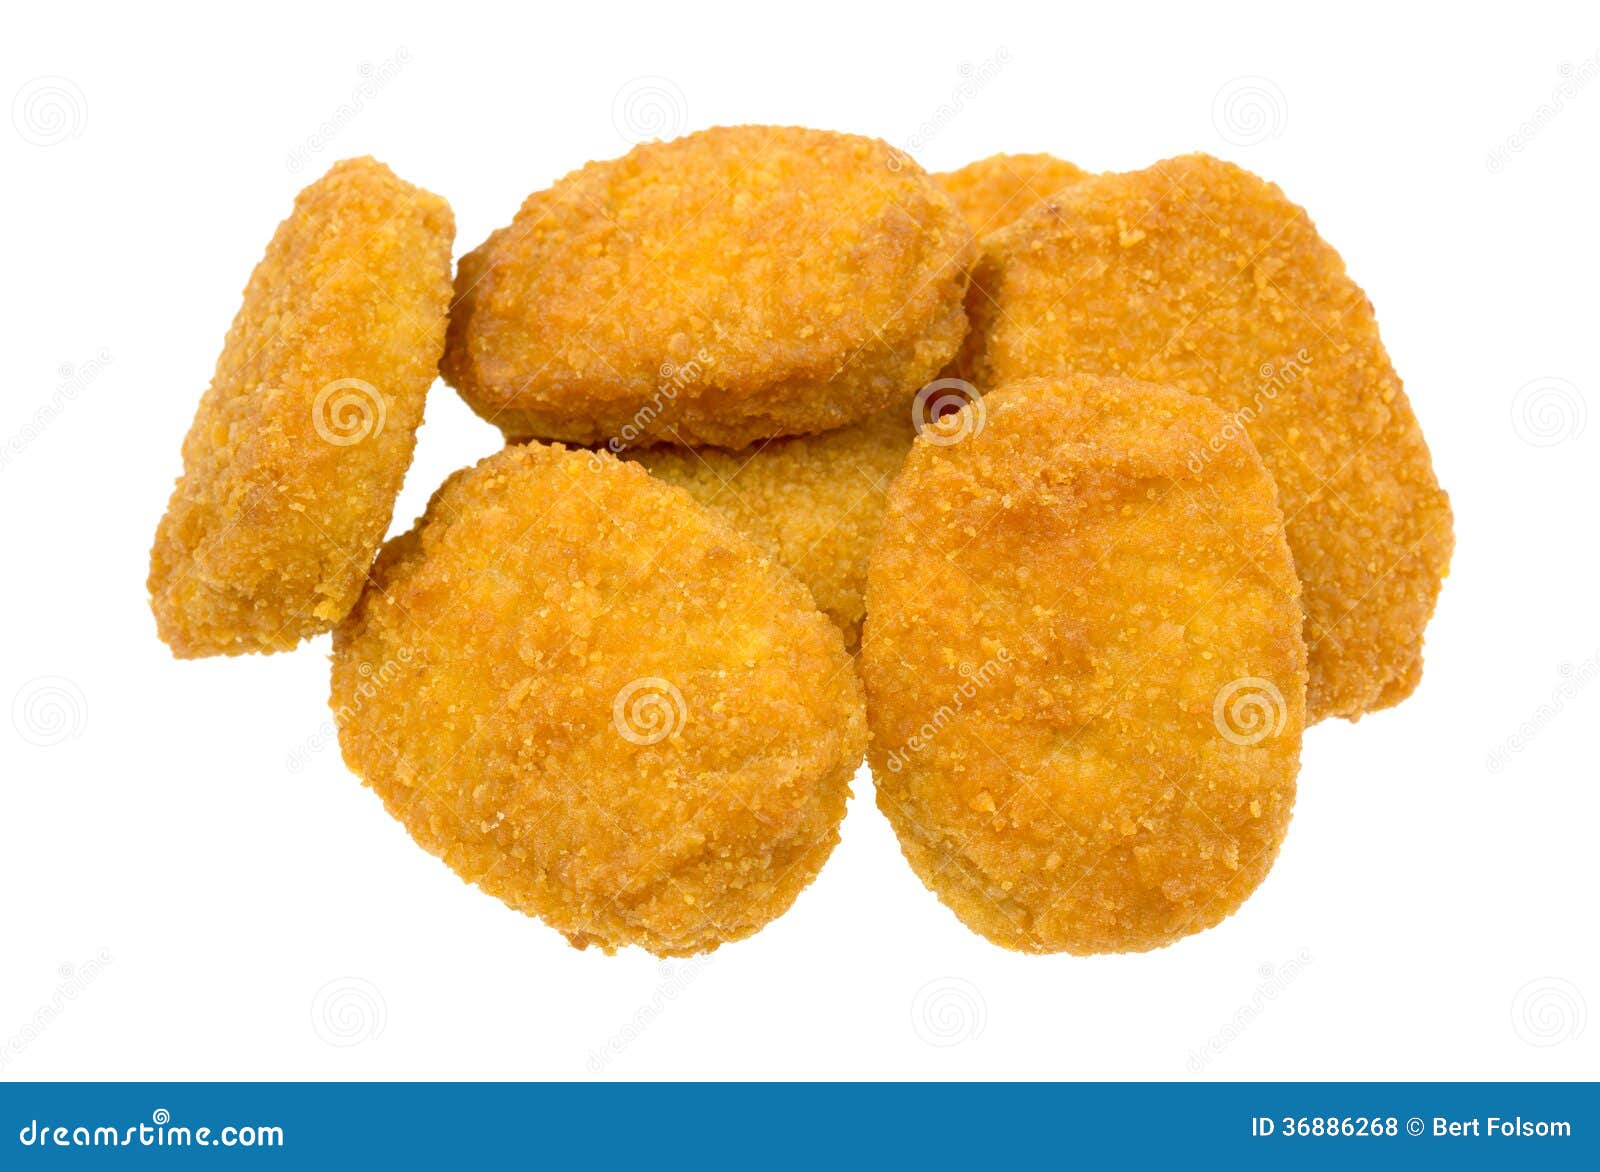 free clipart chicken nuggets - photo #32